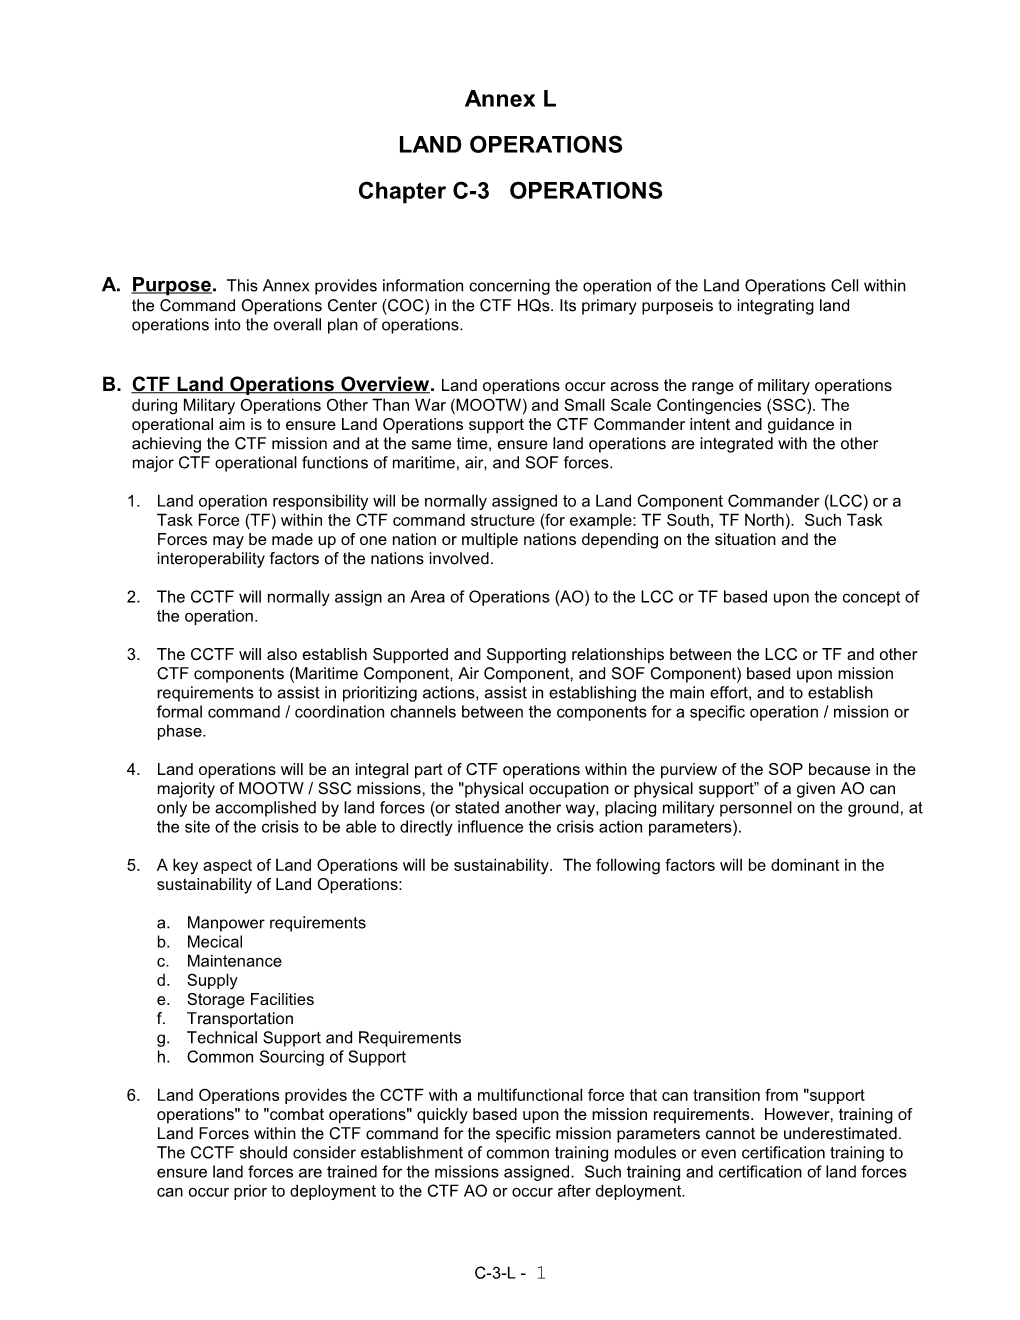 Chapter C-3 OPERATIONS